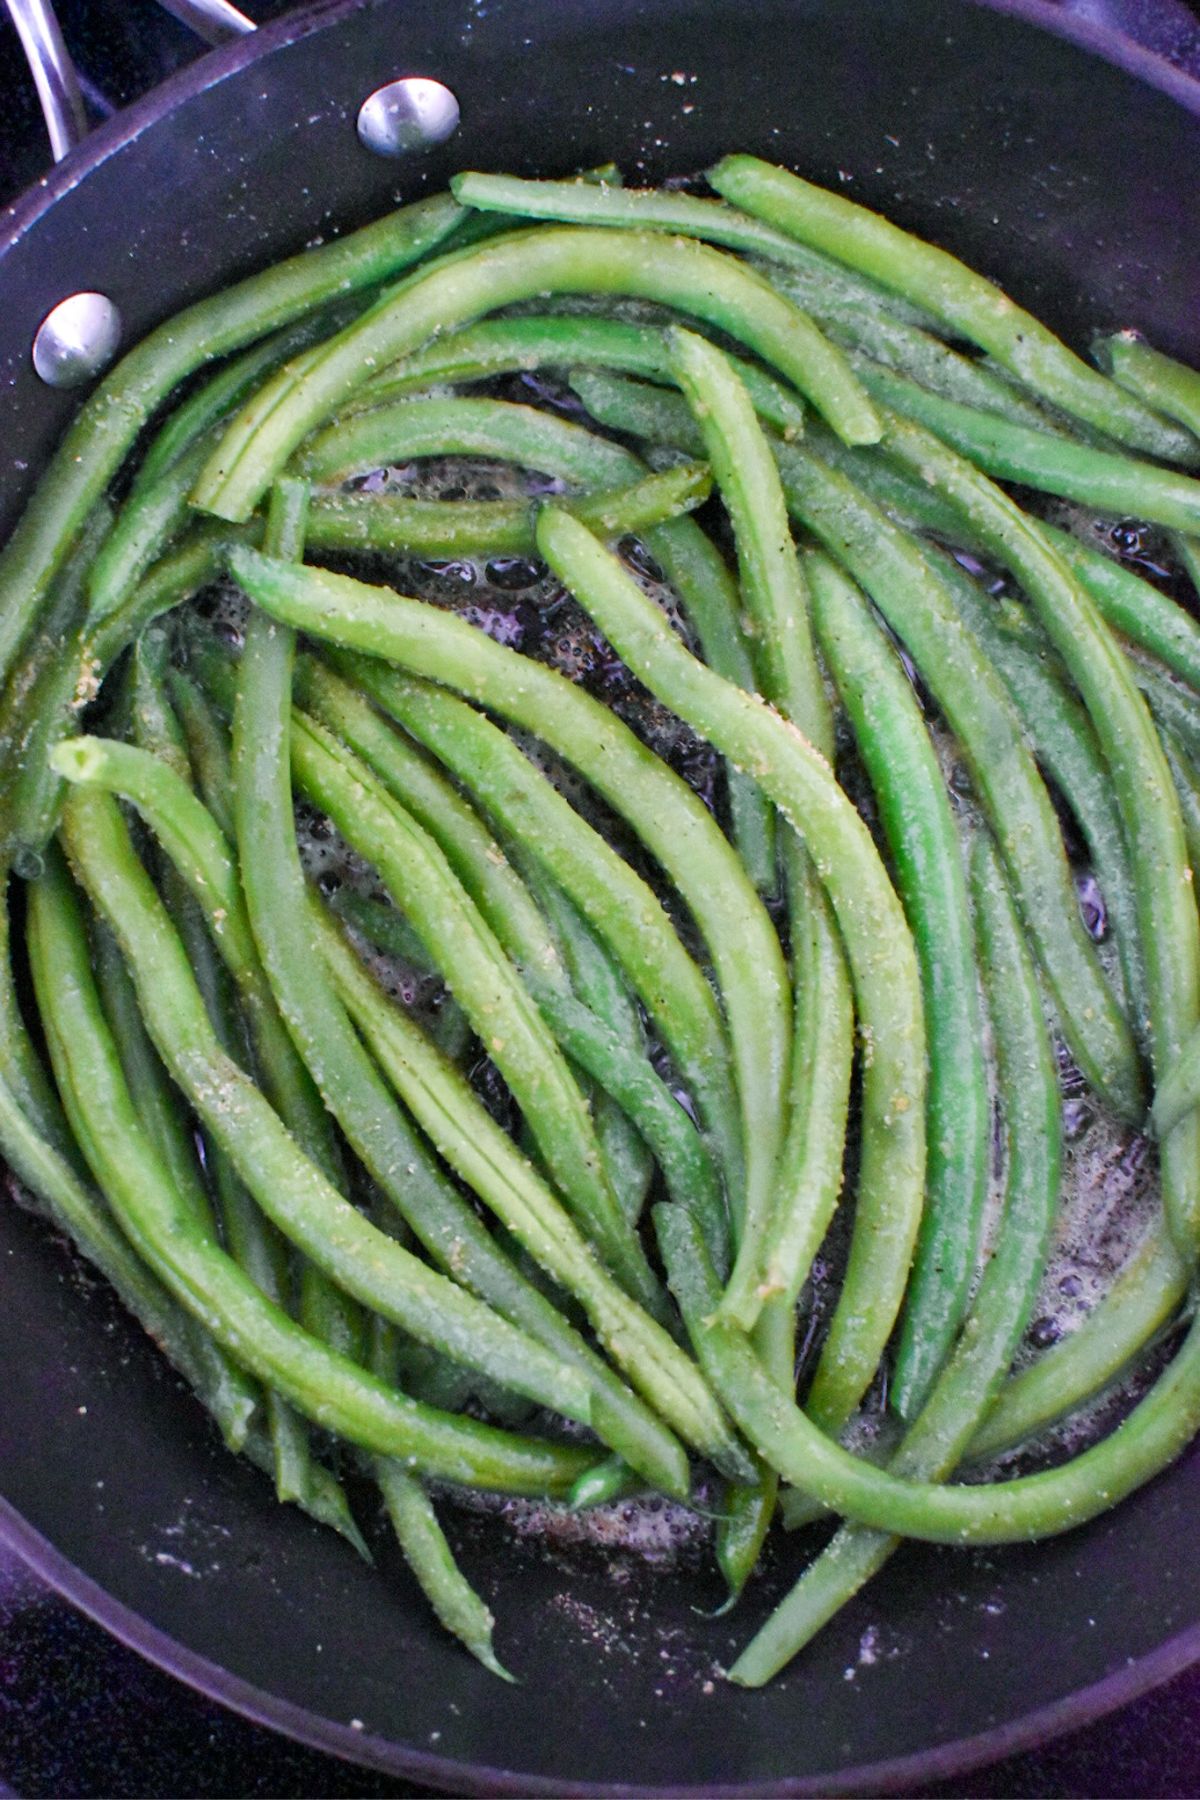 Green beans beginning to cook and soften in a sauté pan.